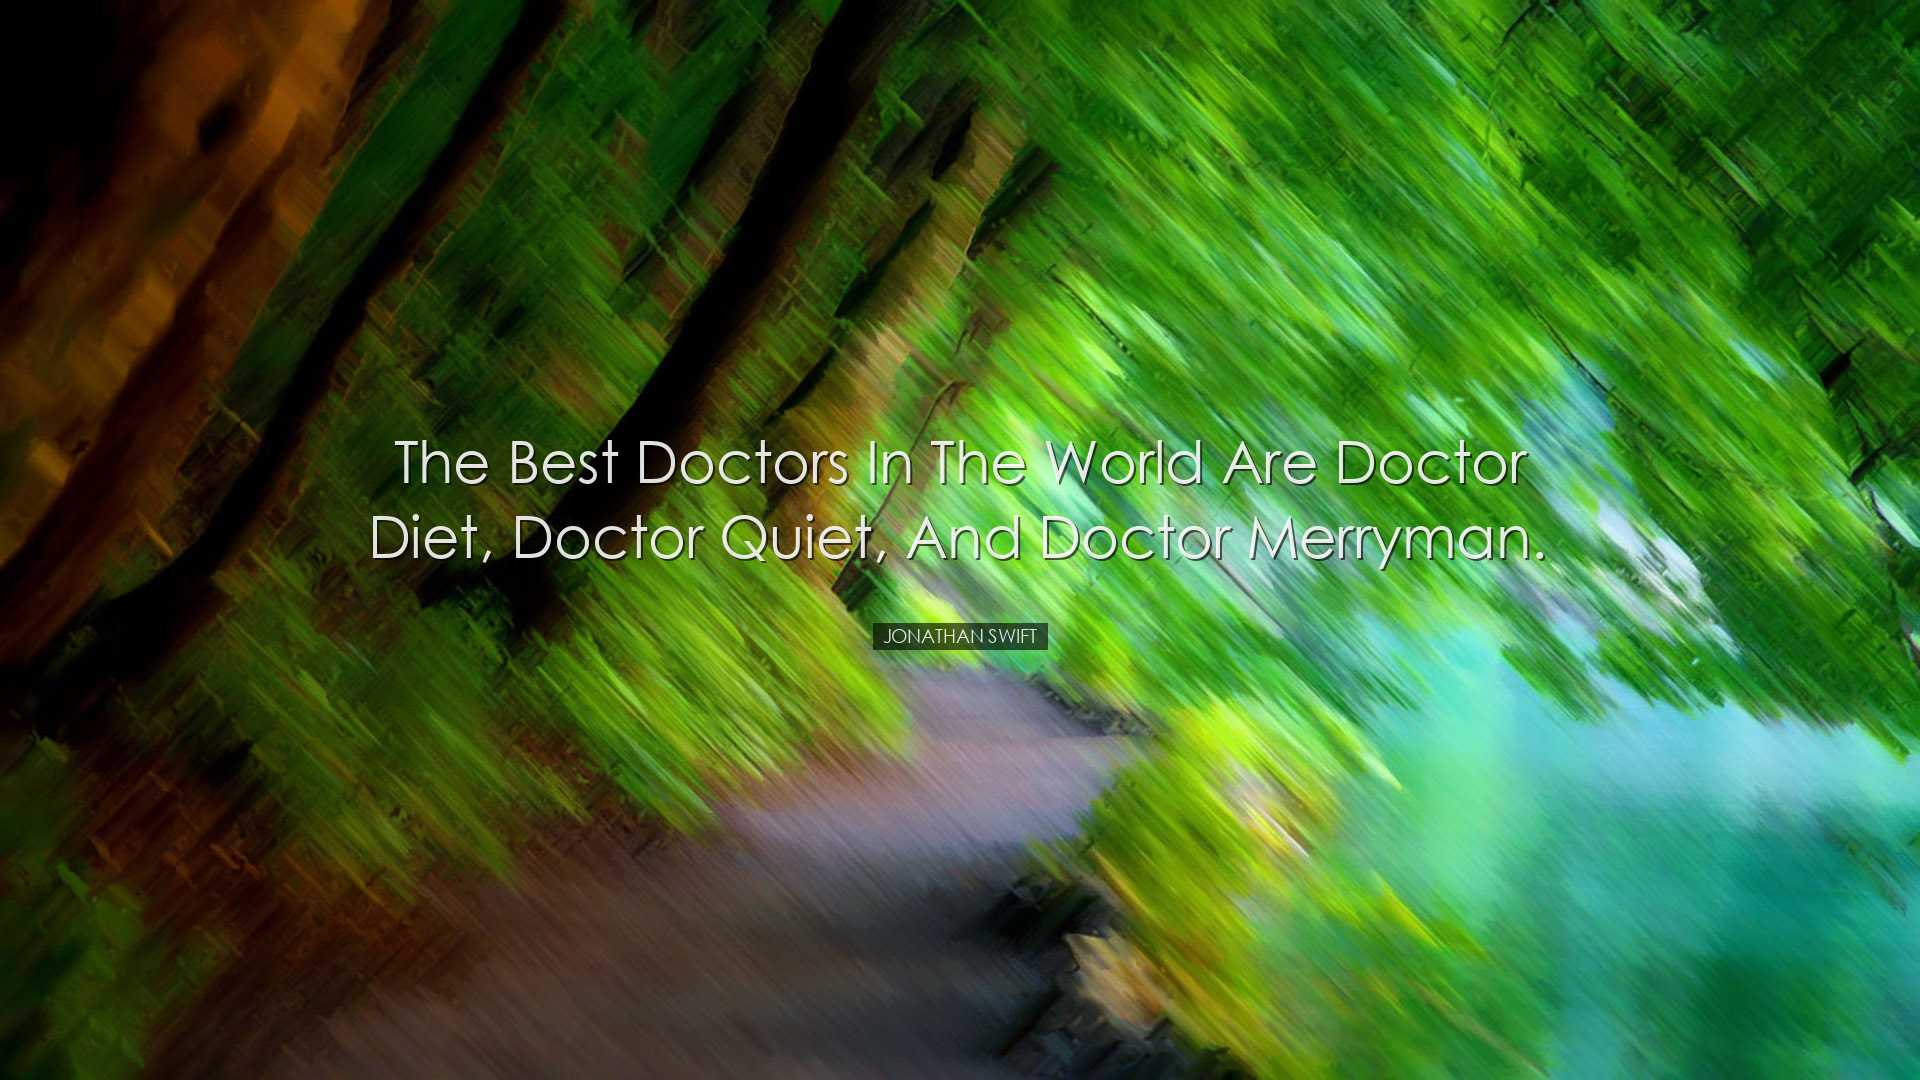 The best doctors in the world are Doctor Diet, Doctor Quiet, and D